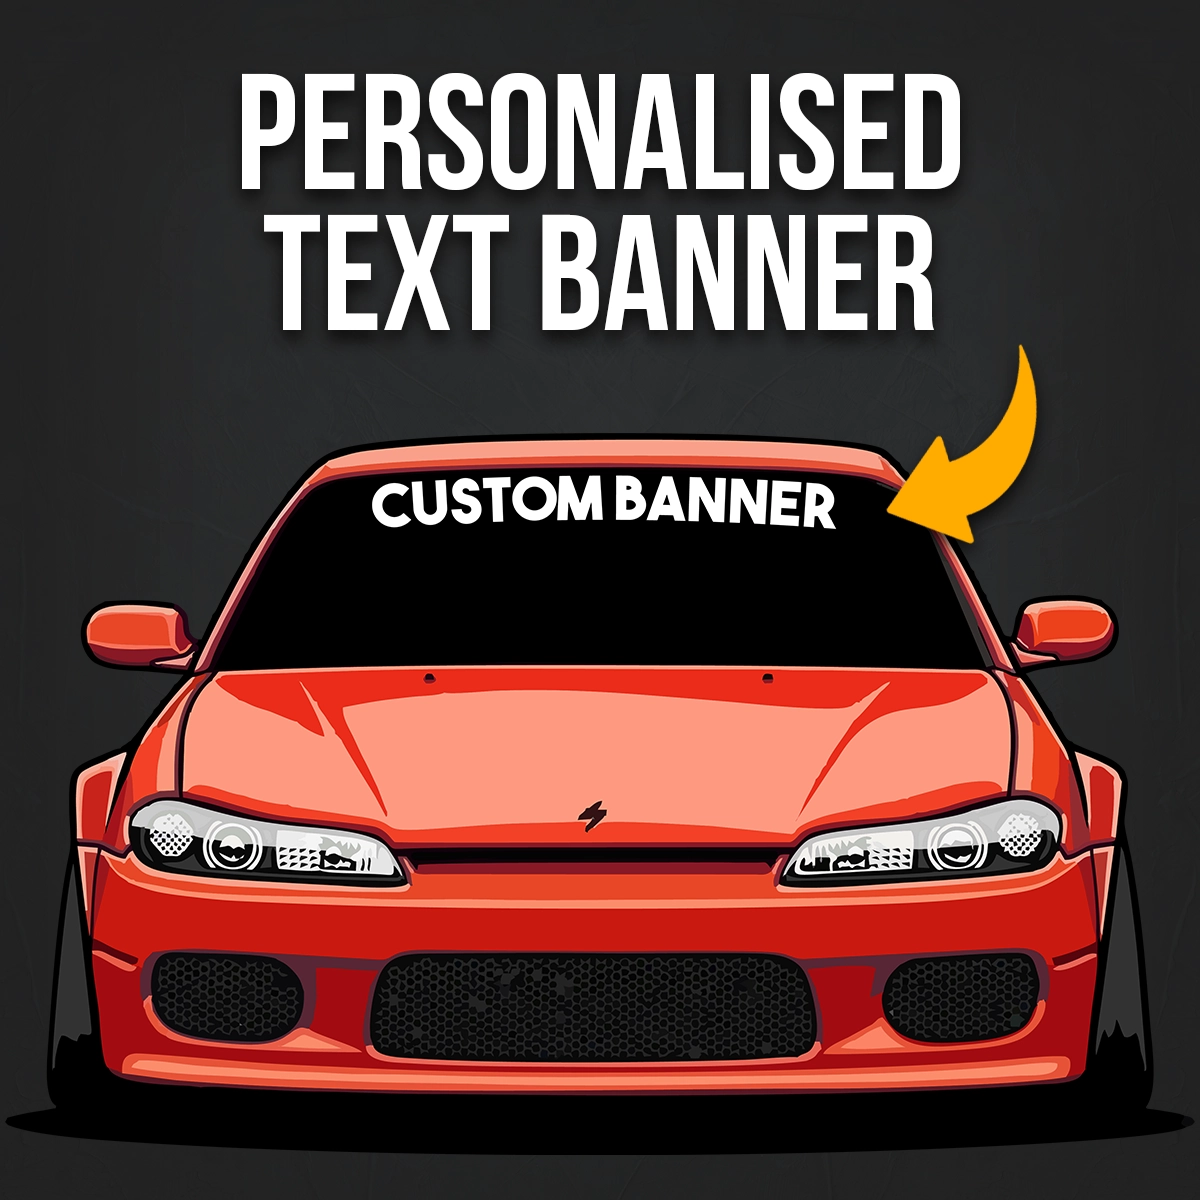 Personalised Text Banner Decal